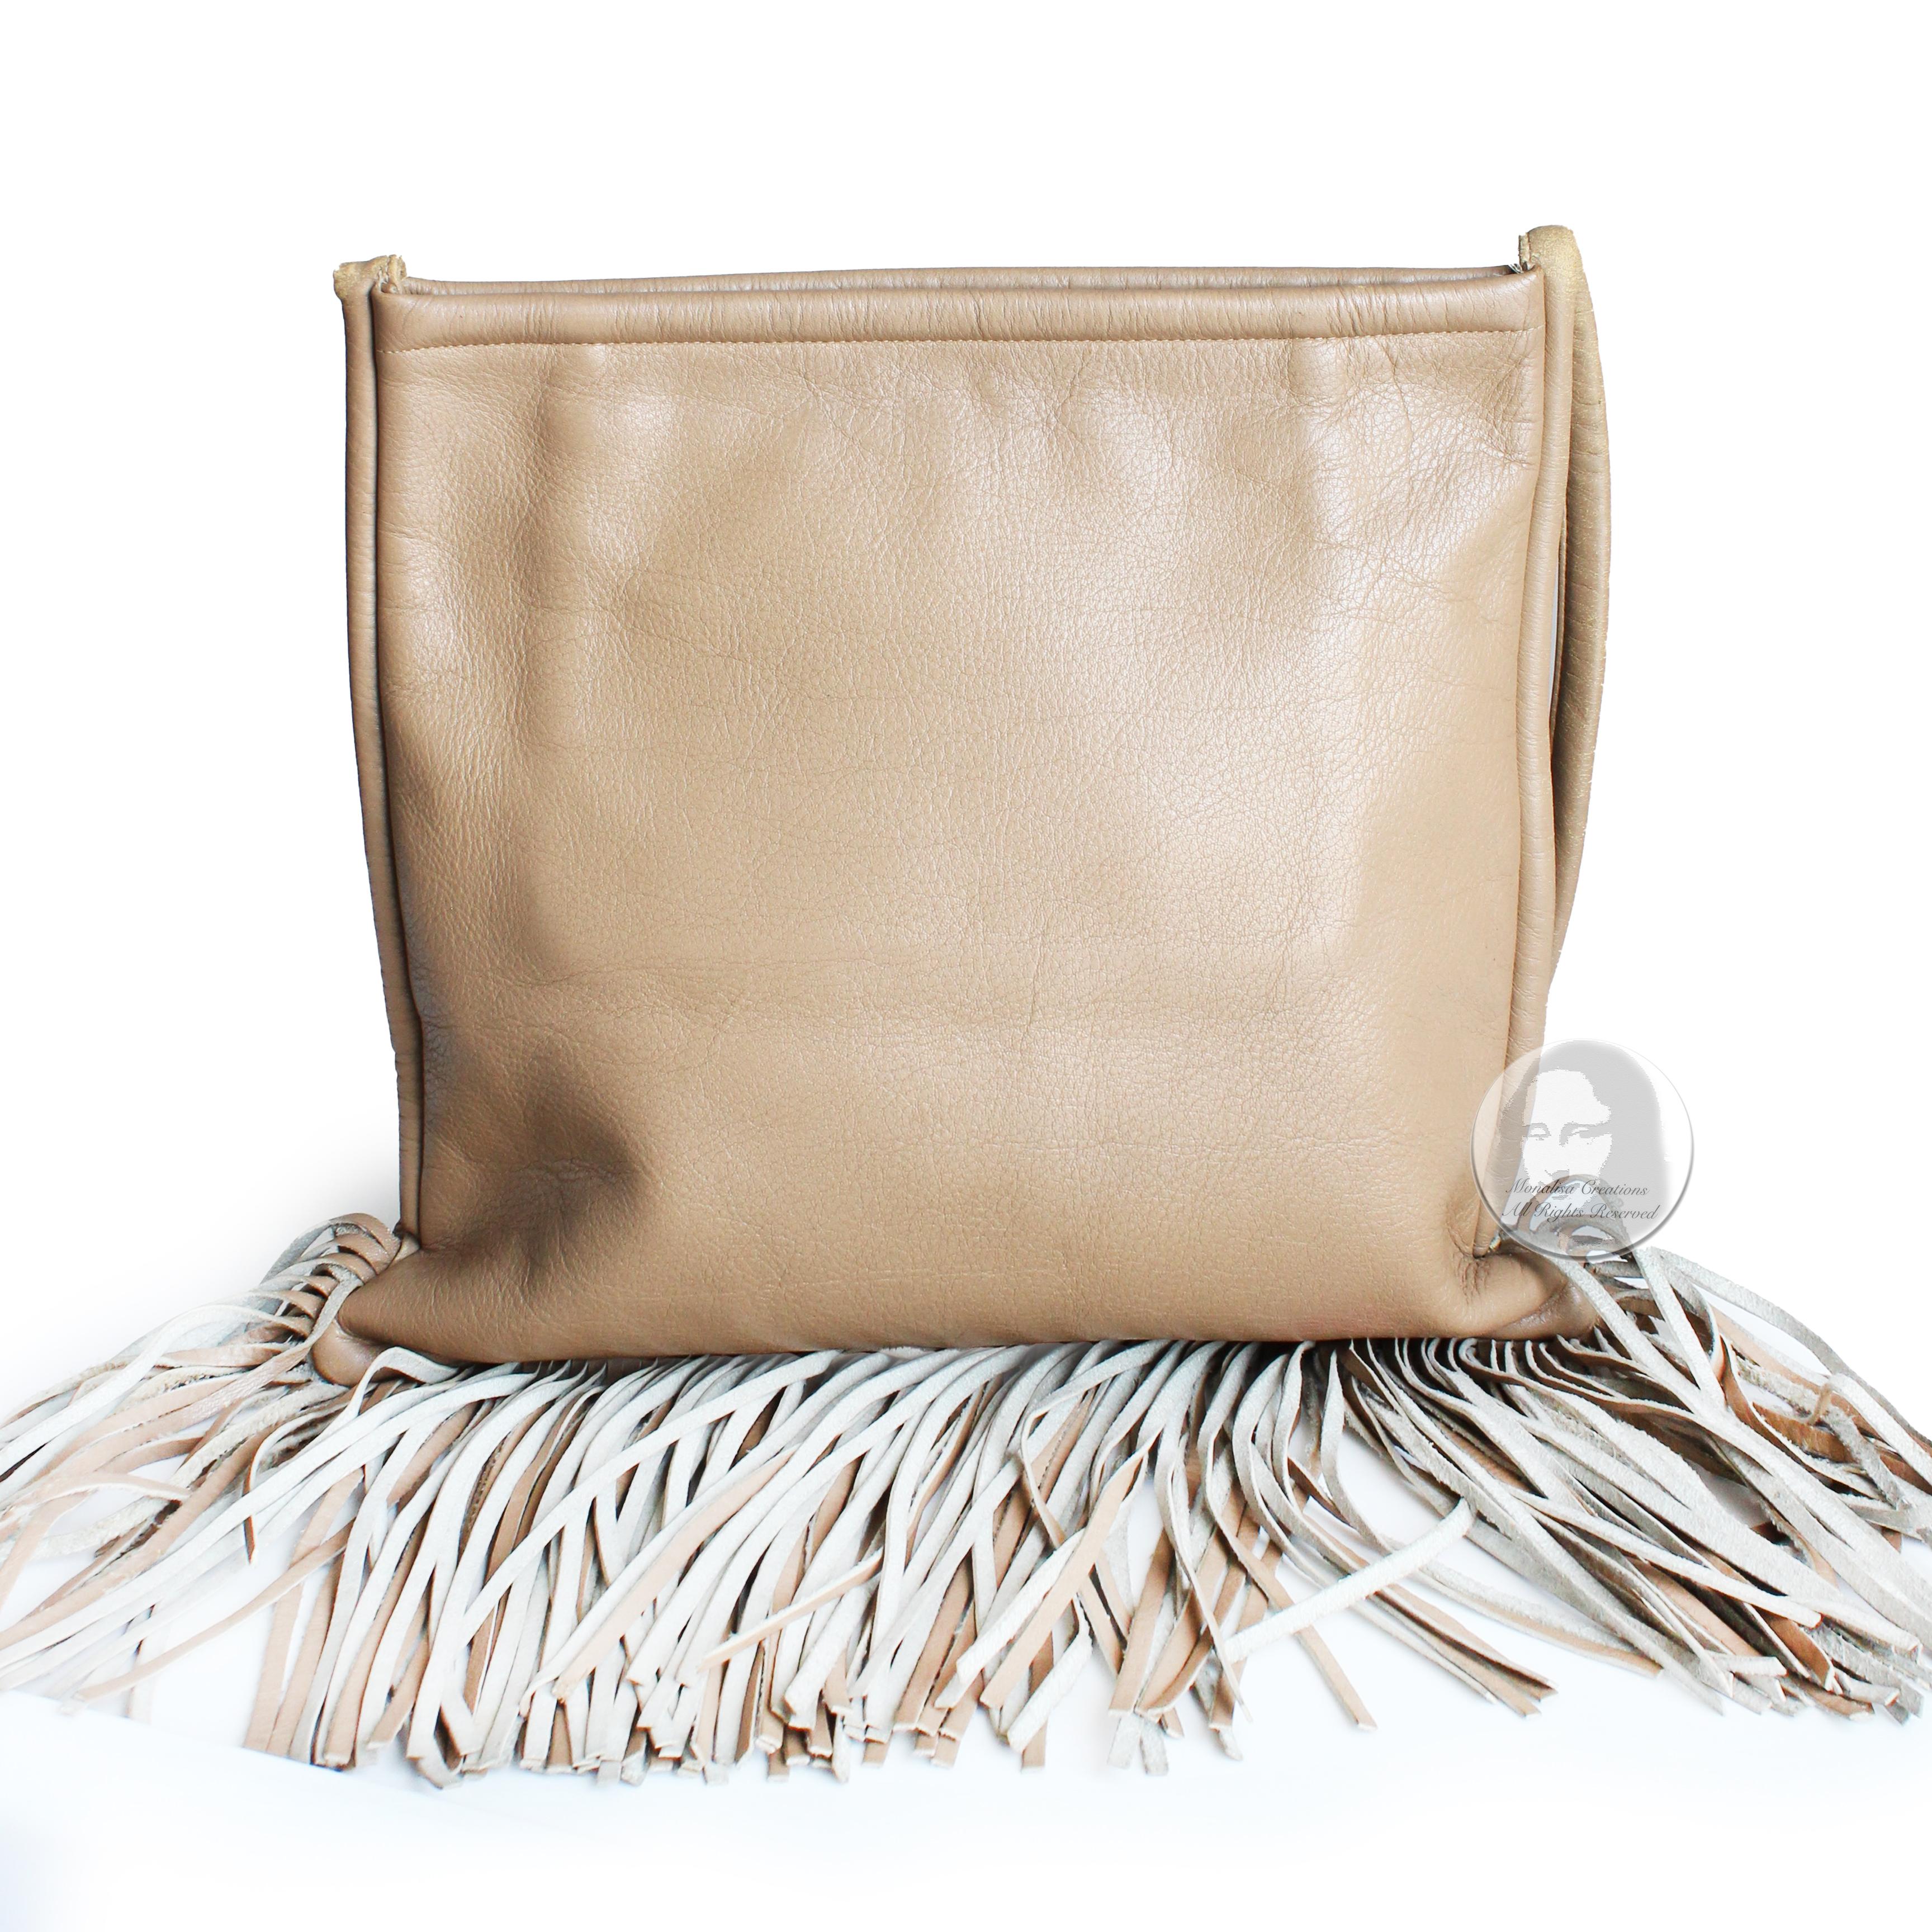 Authentic, preowned, vintage Bonnie Cashin for Coach Cashin Carry Leather Fringe Shoulder Bag, likely made in the 60s. A 